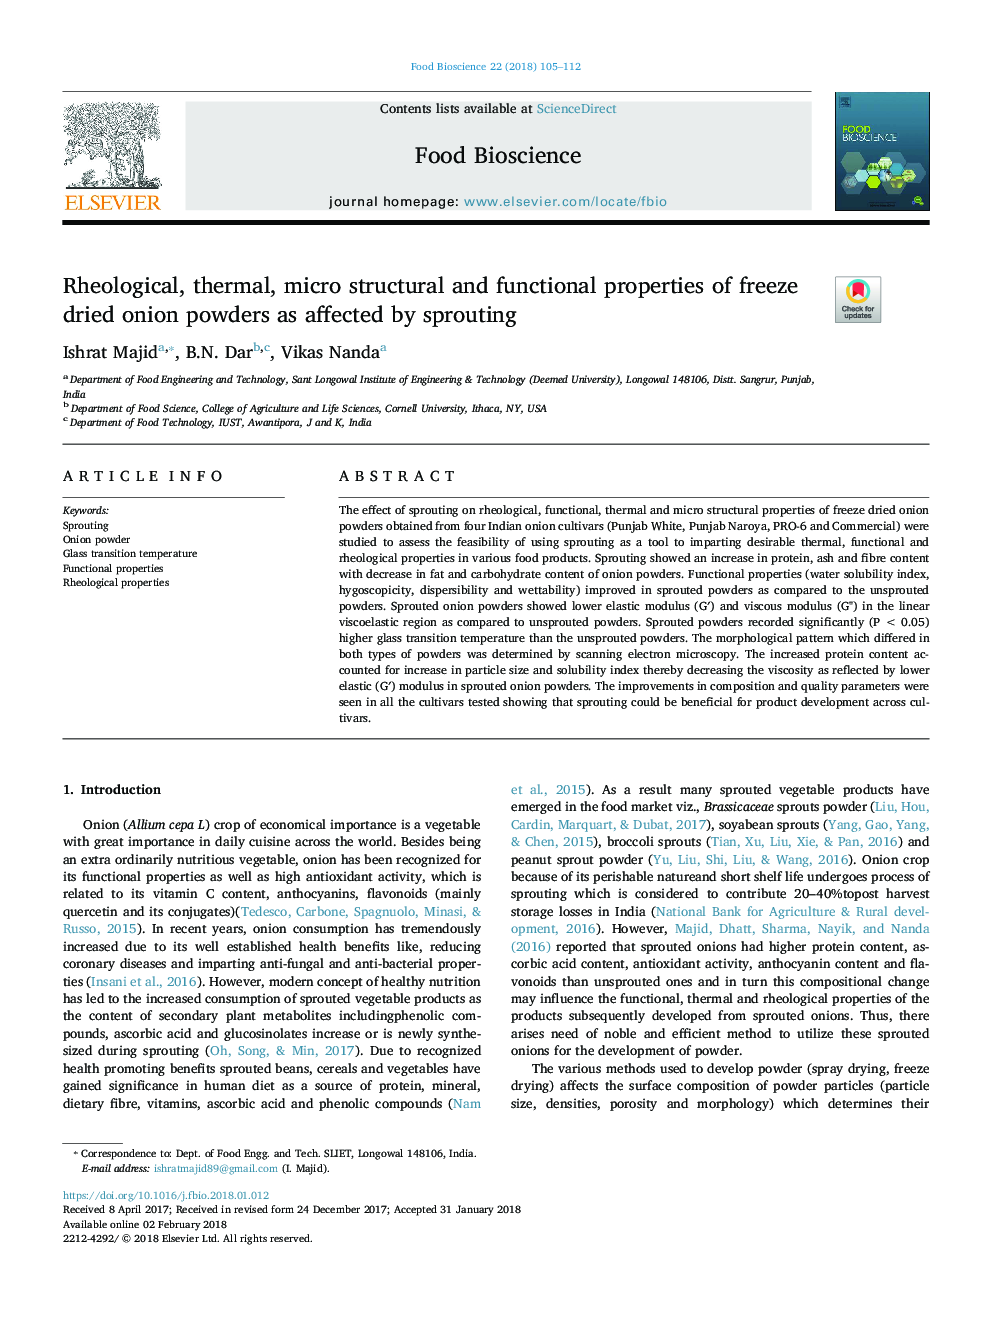 Rheological, thermal, micro structural and functional properties of freeze dried onion powders as affected by sprouting